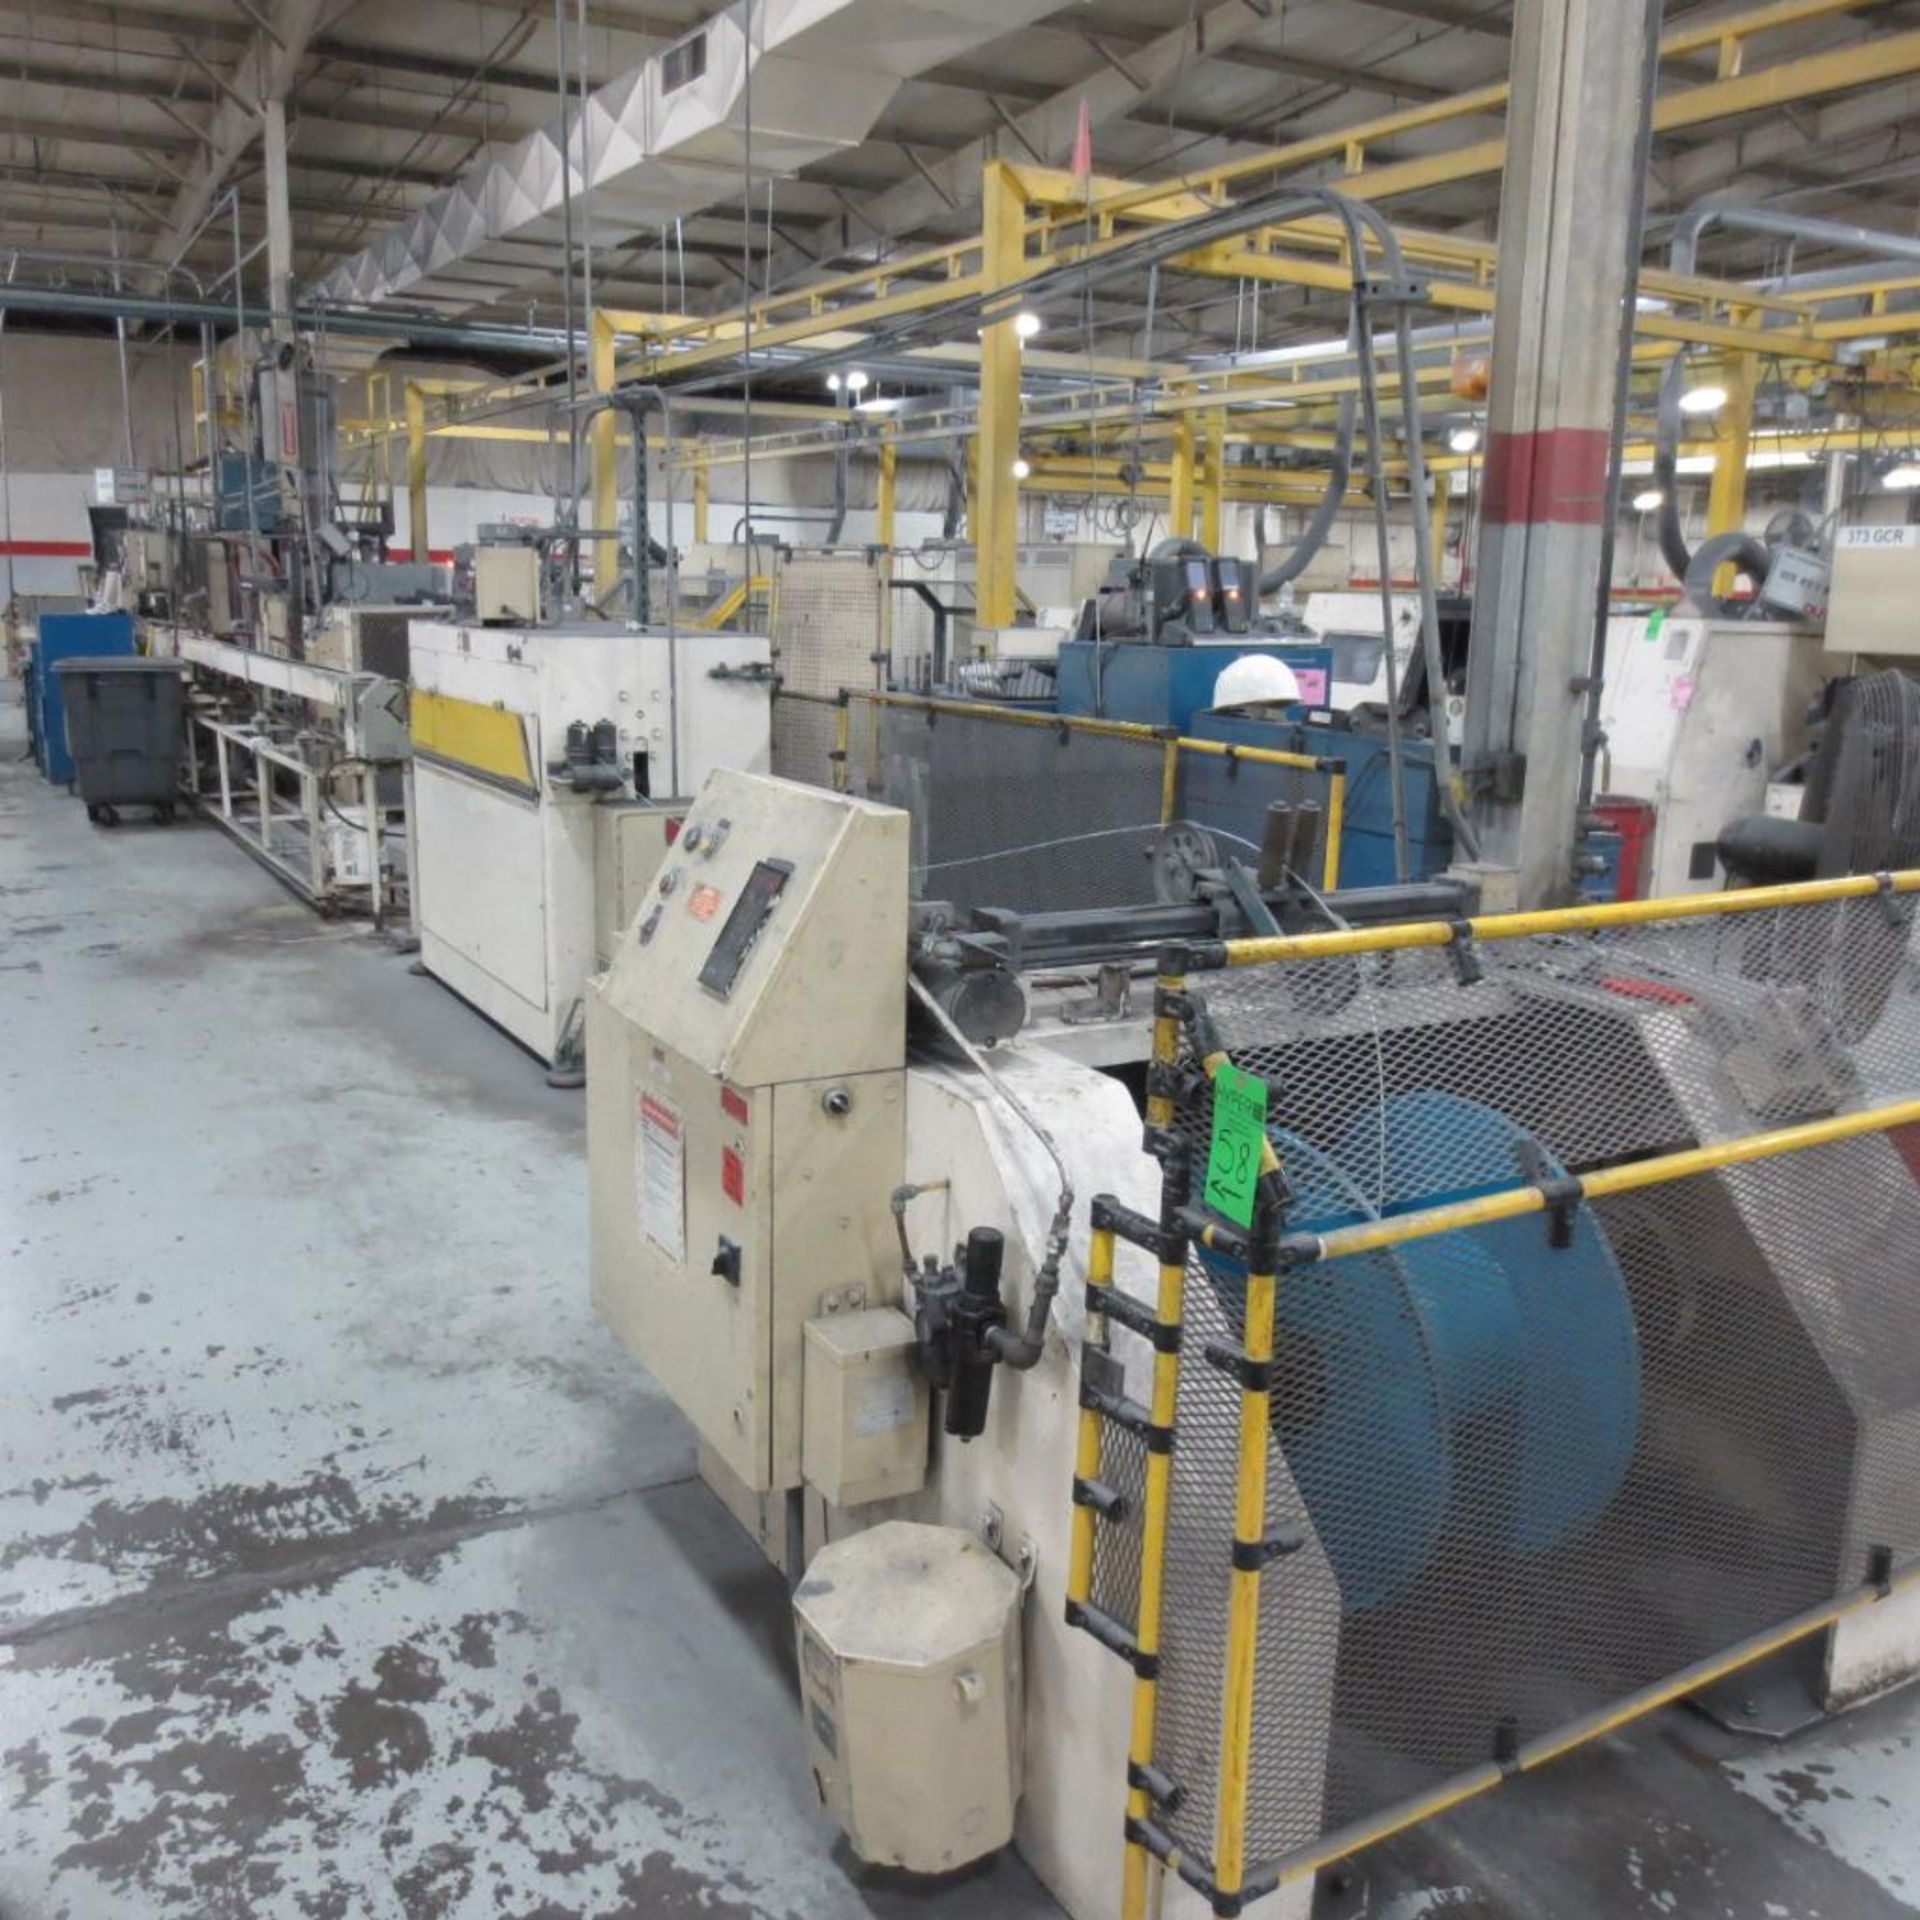 Strand Extrusion Extruder #9 Daves Extruder 2.5, 1989, K-9341 With Thoreson TD150 Dryer, Con Air EP2